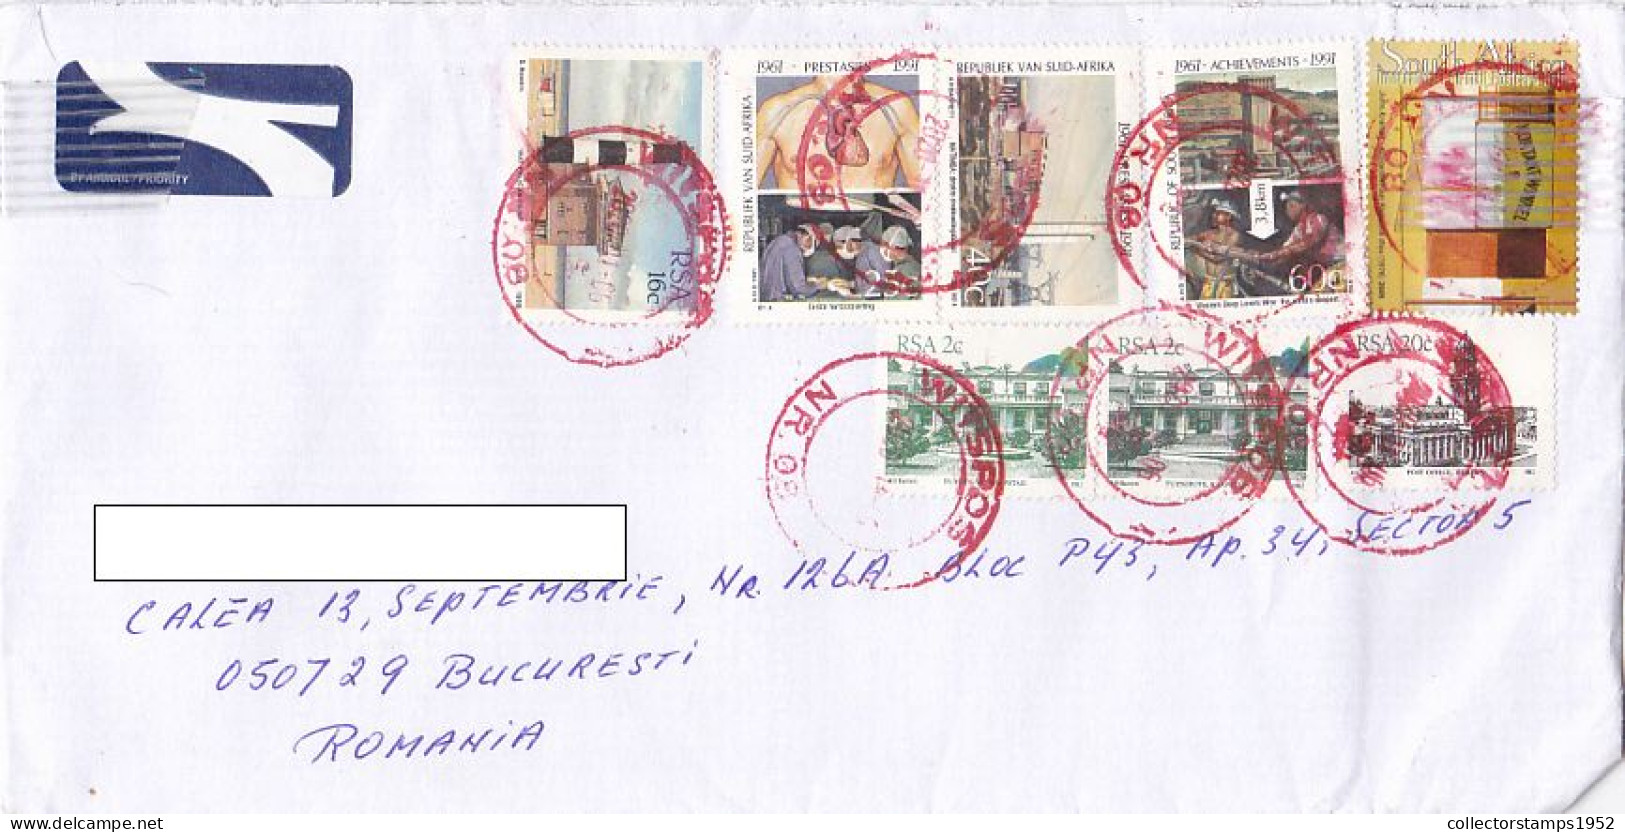 LIGHTHOUSE, MEDICINE, INDUSTRY, ARCHIOTECTURE STAMPS ON COVER, 2021, SOUTH AFRICA - Covers & Documents